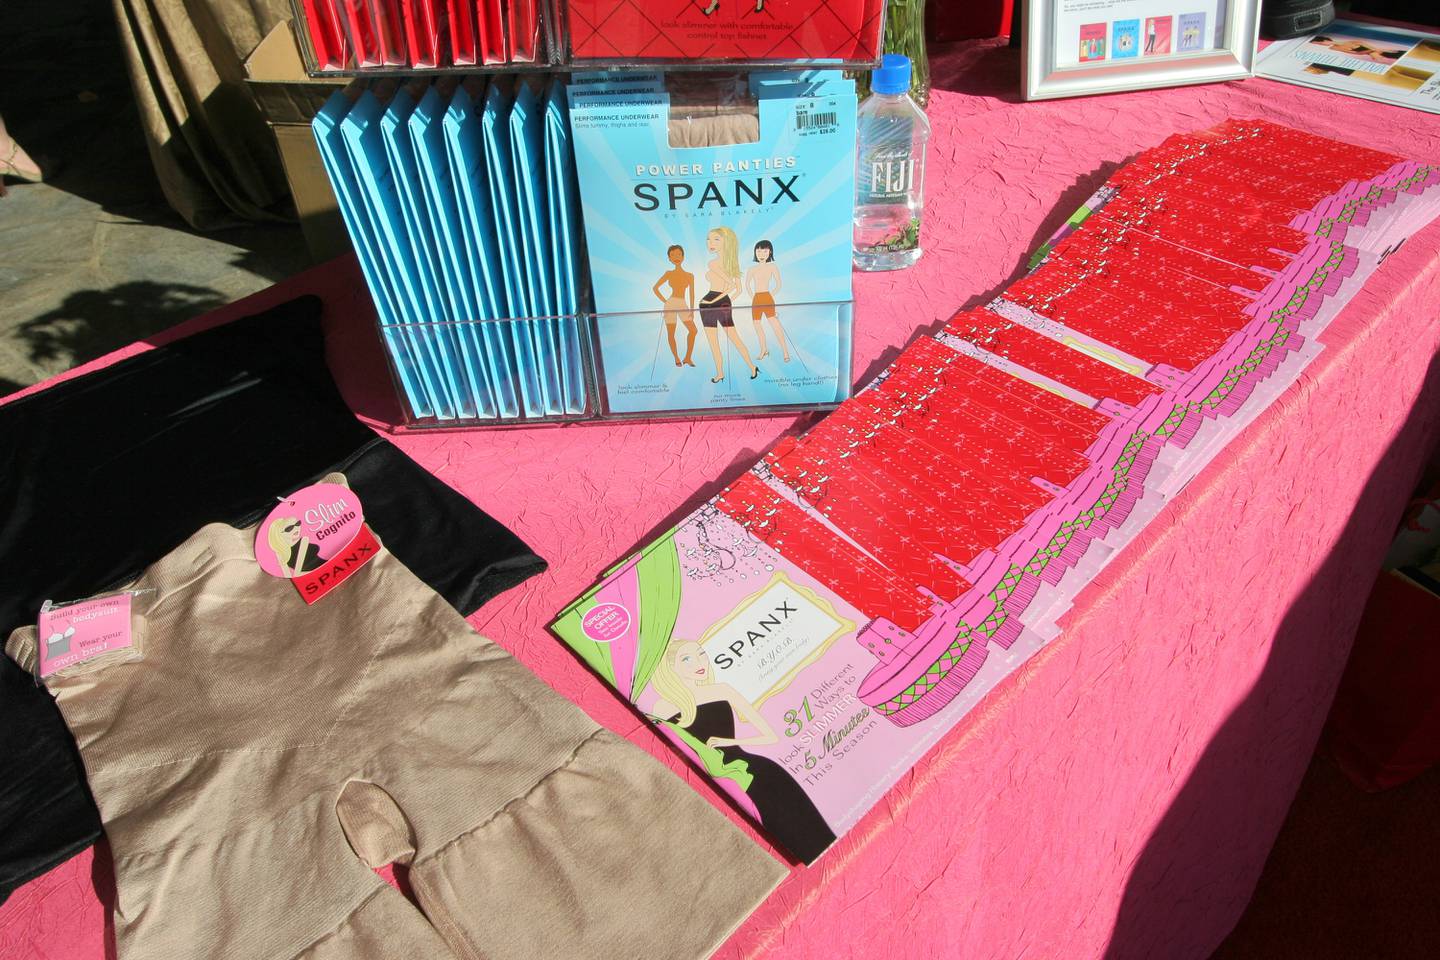 A Spanx display at the Golden Globes Style Lounge in 2006.